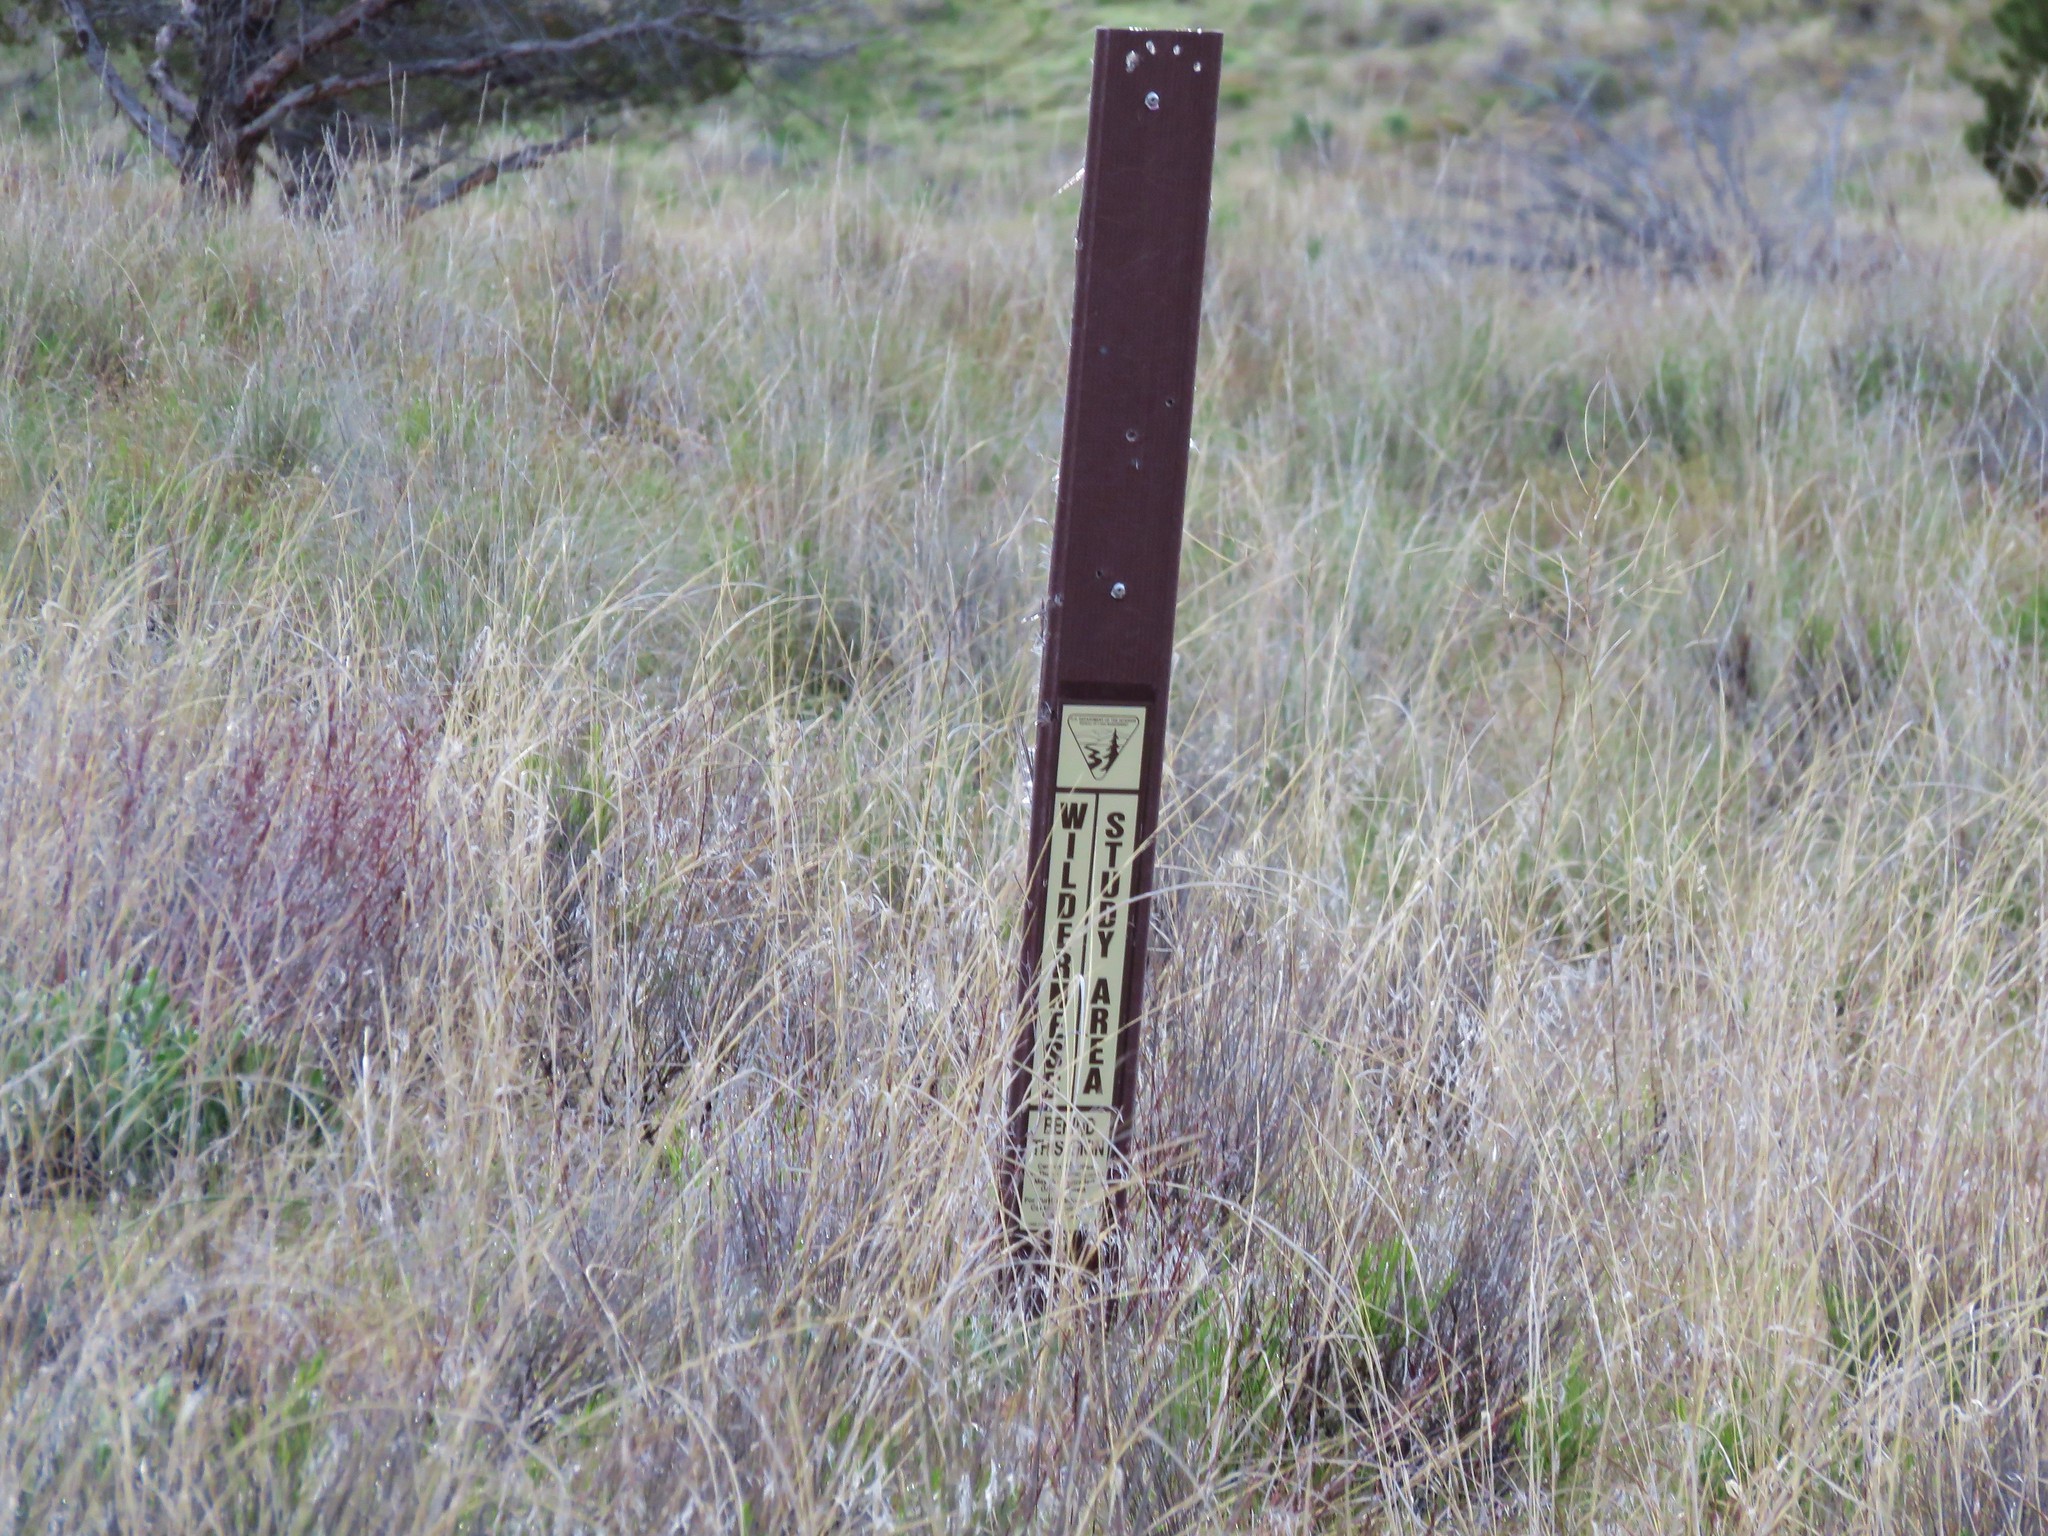 Wilderness signpost at the Spring Basin Wilderness